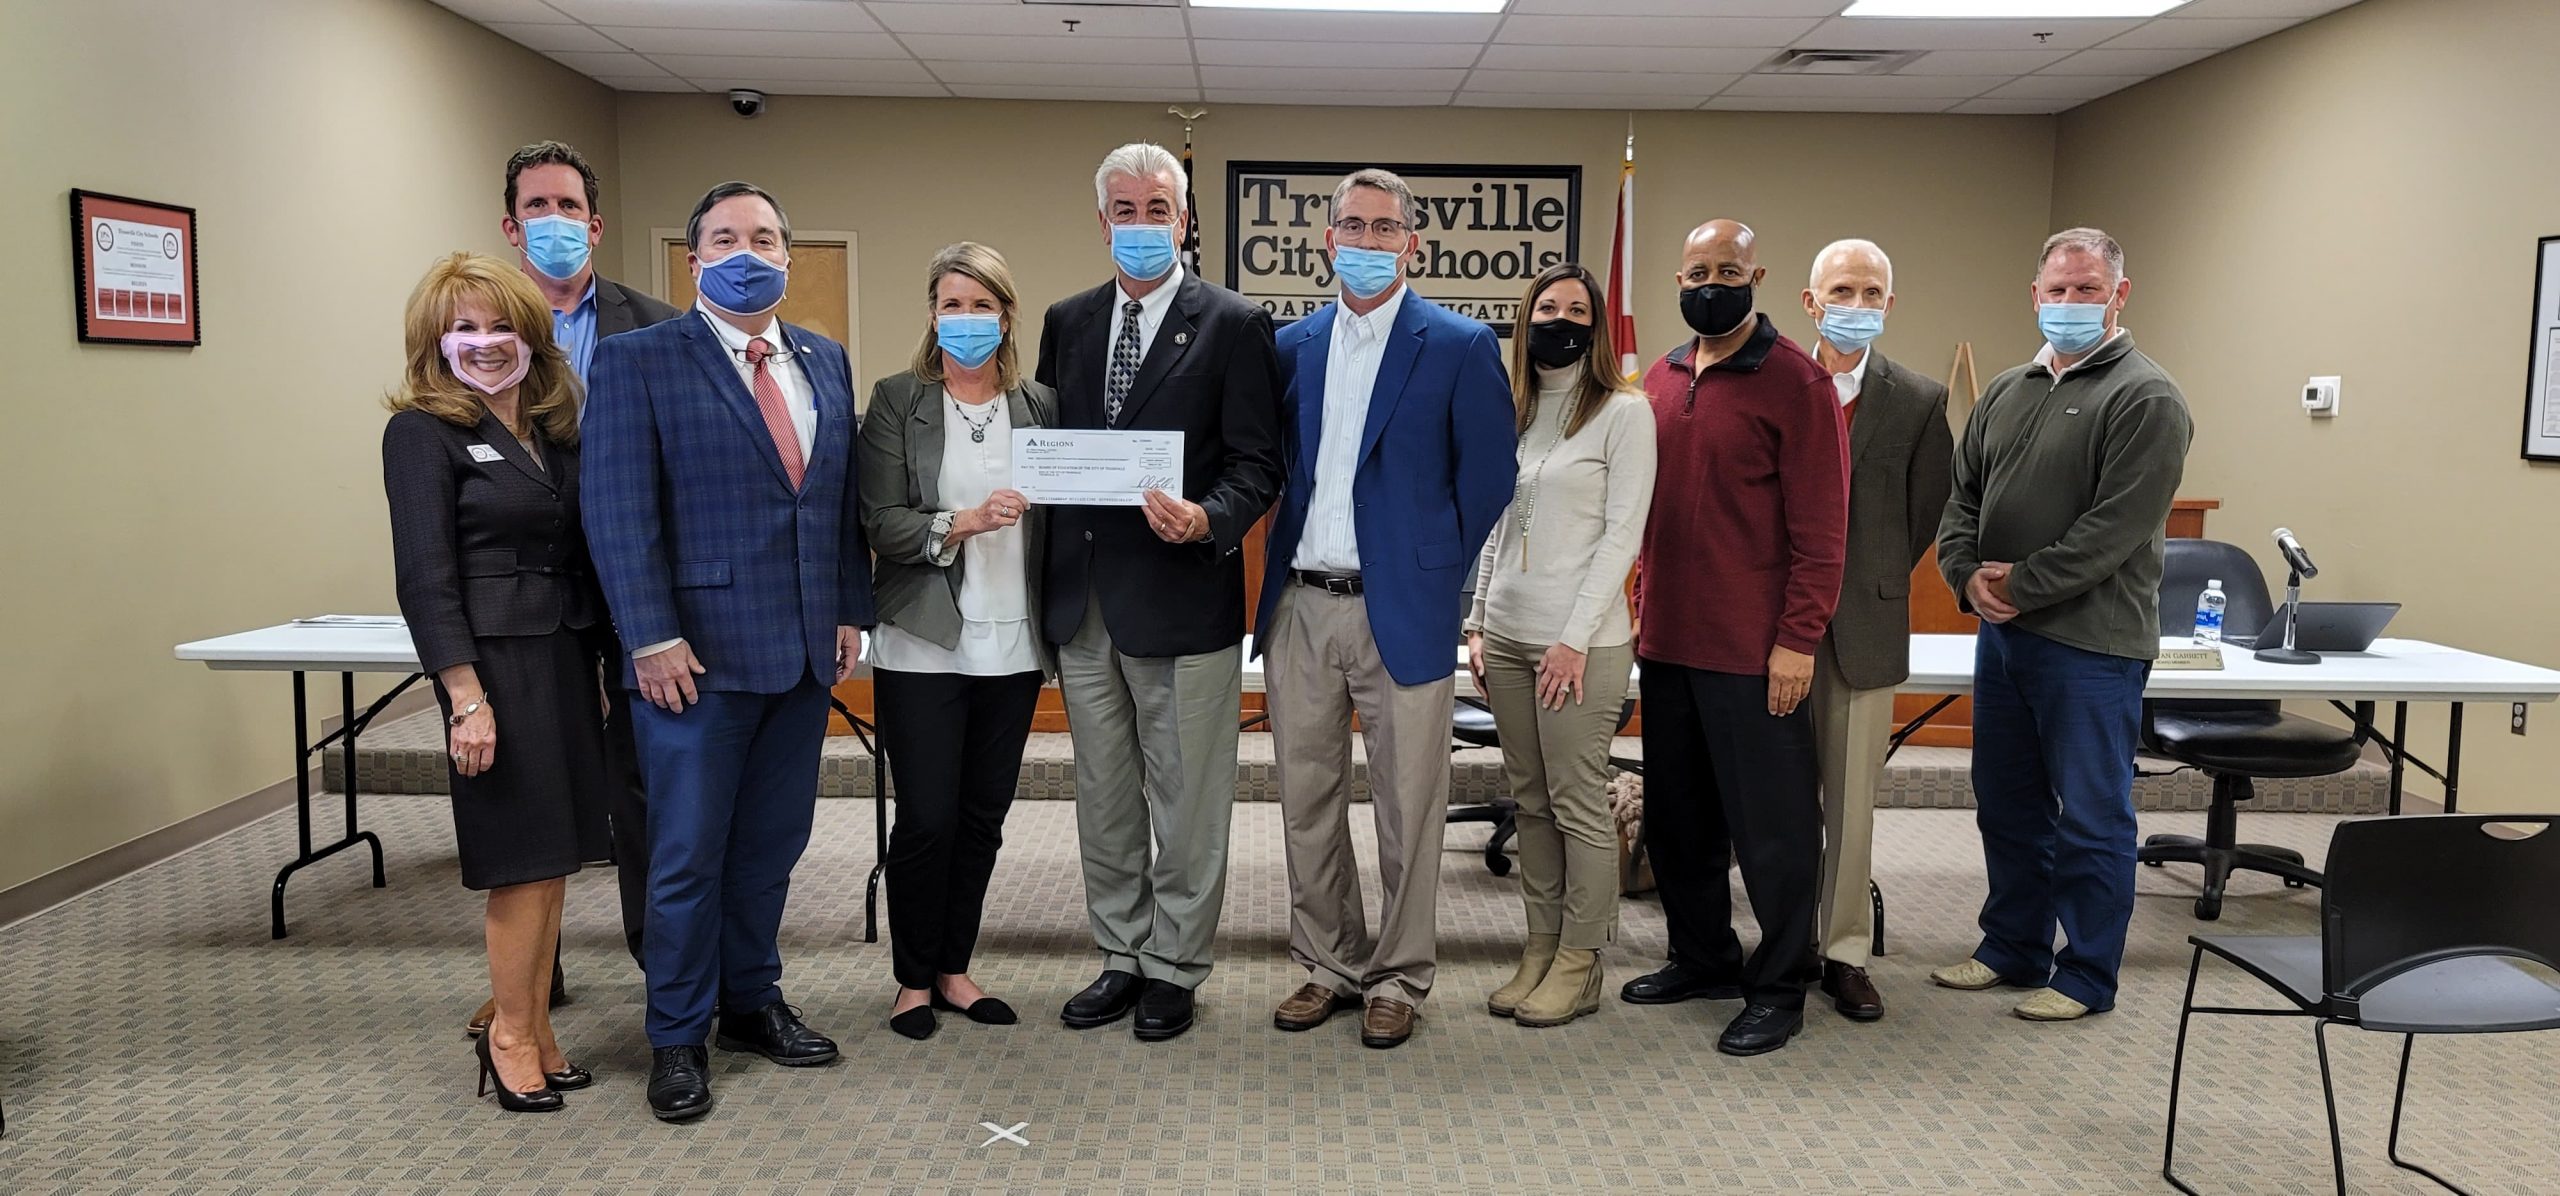 TCS presented with $805K check from Jefferson County